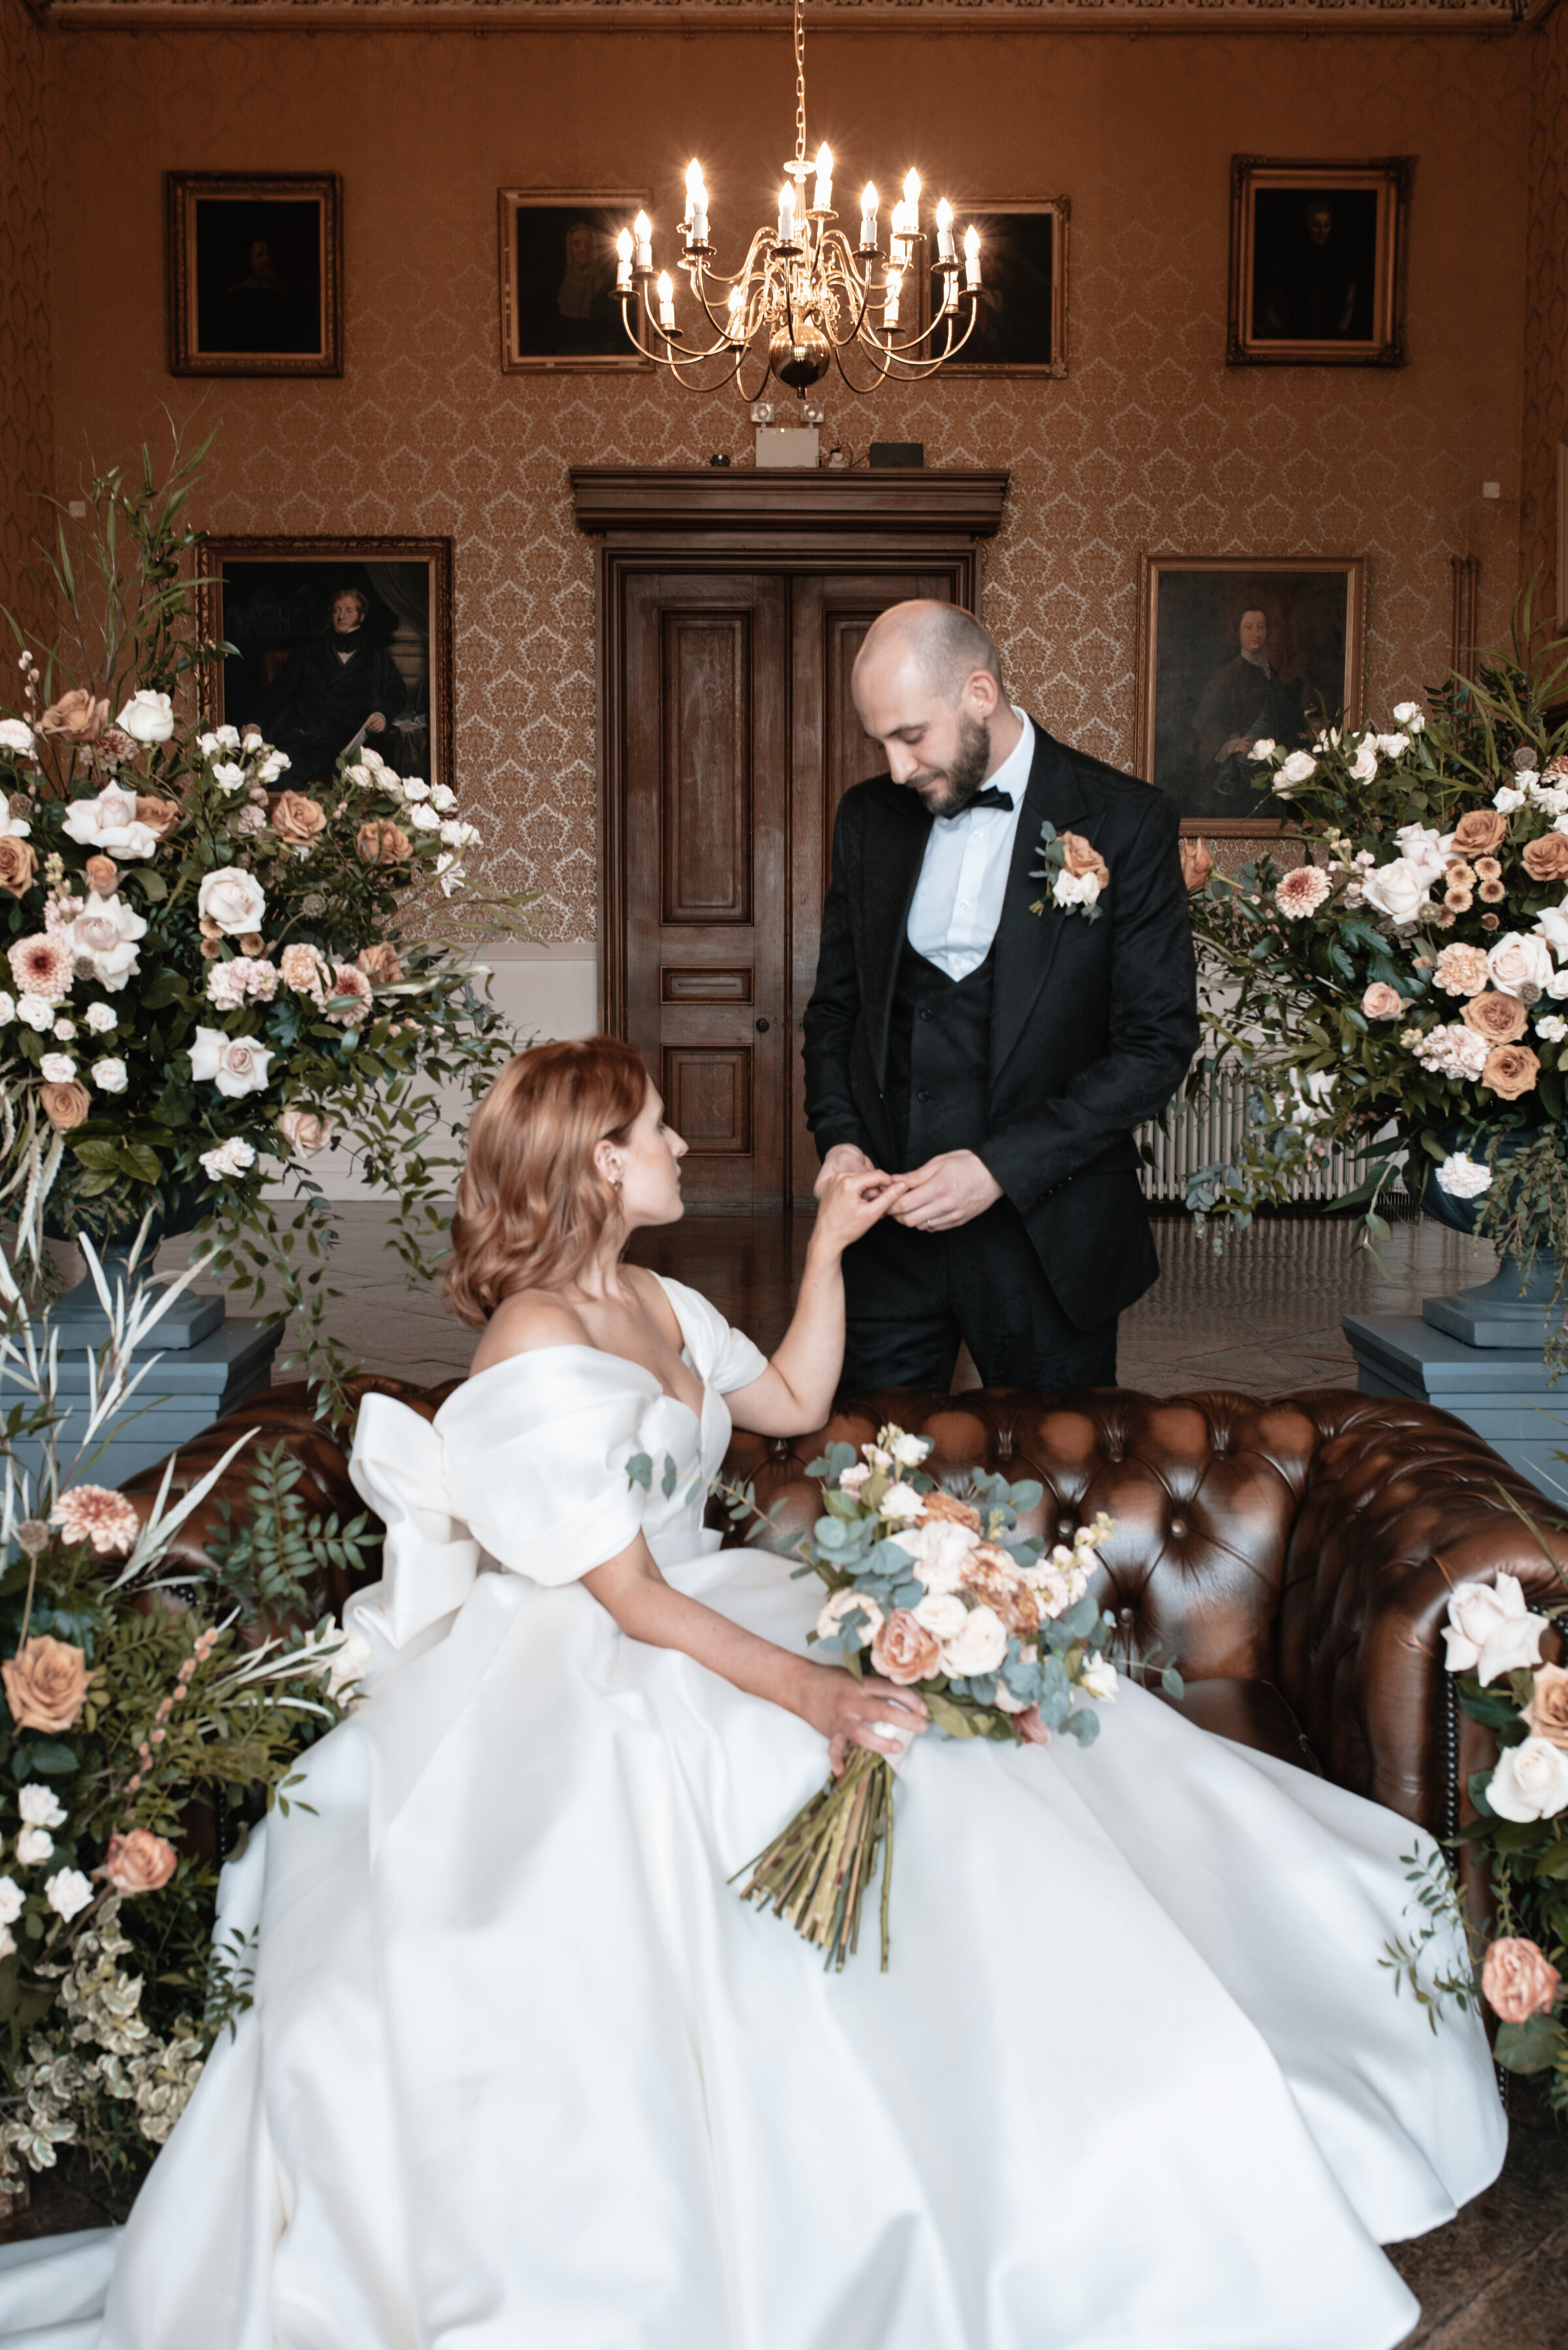 Bride seated holding her standing Grooms hand surrounded by beautiful floral arrangements in magnificent ballroom